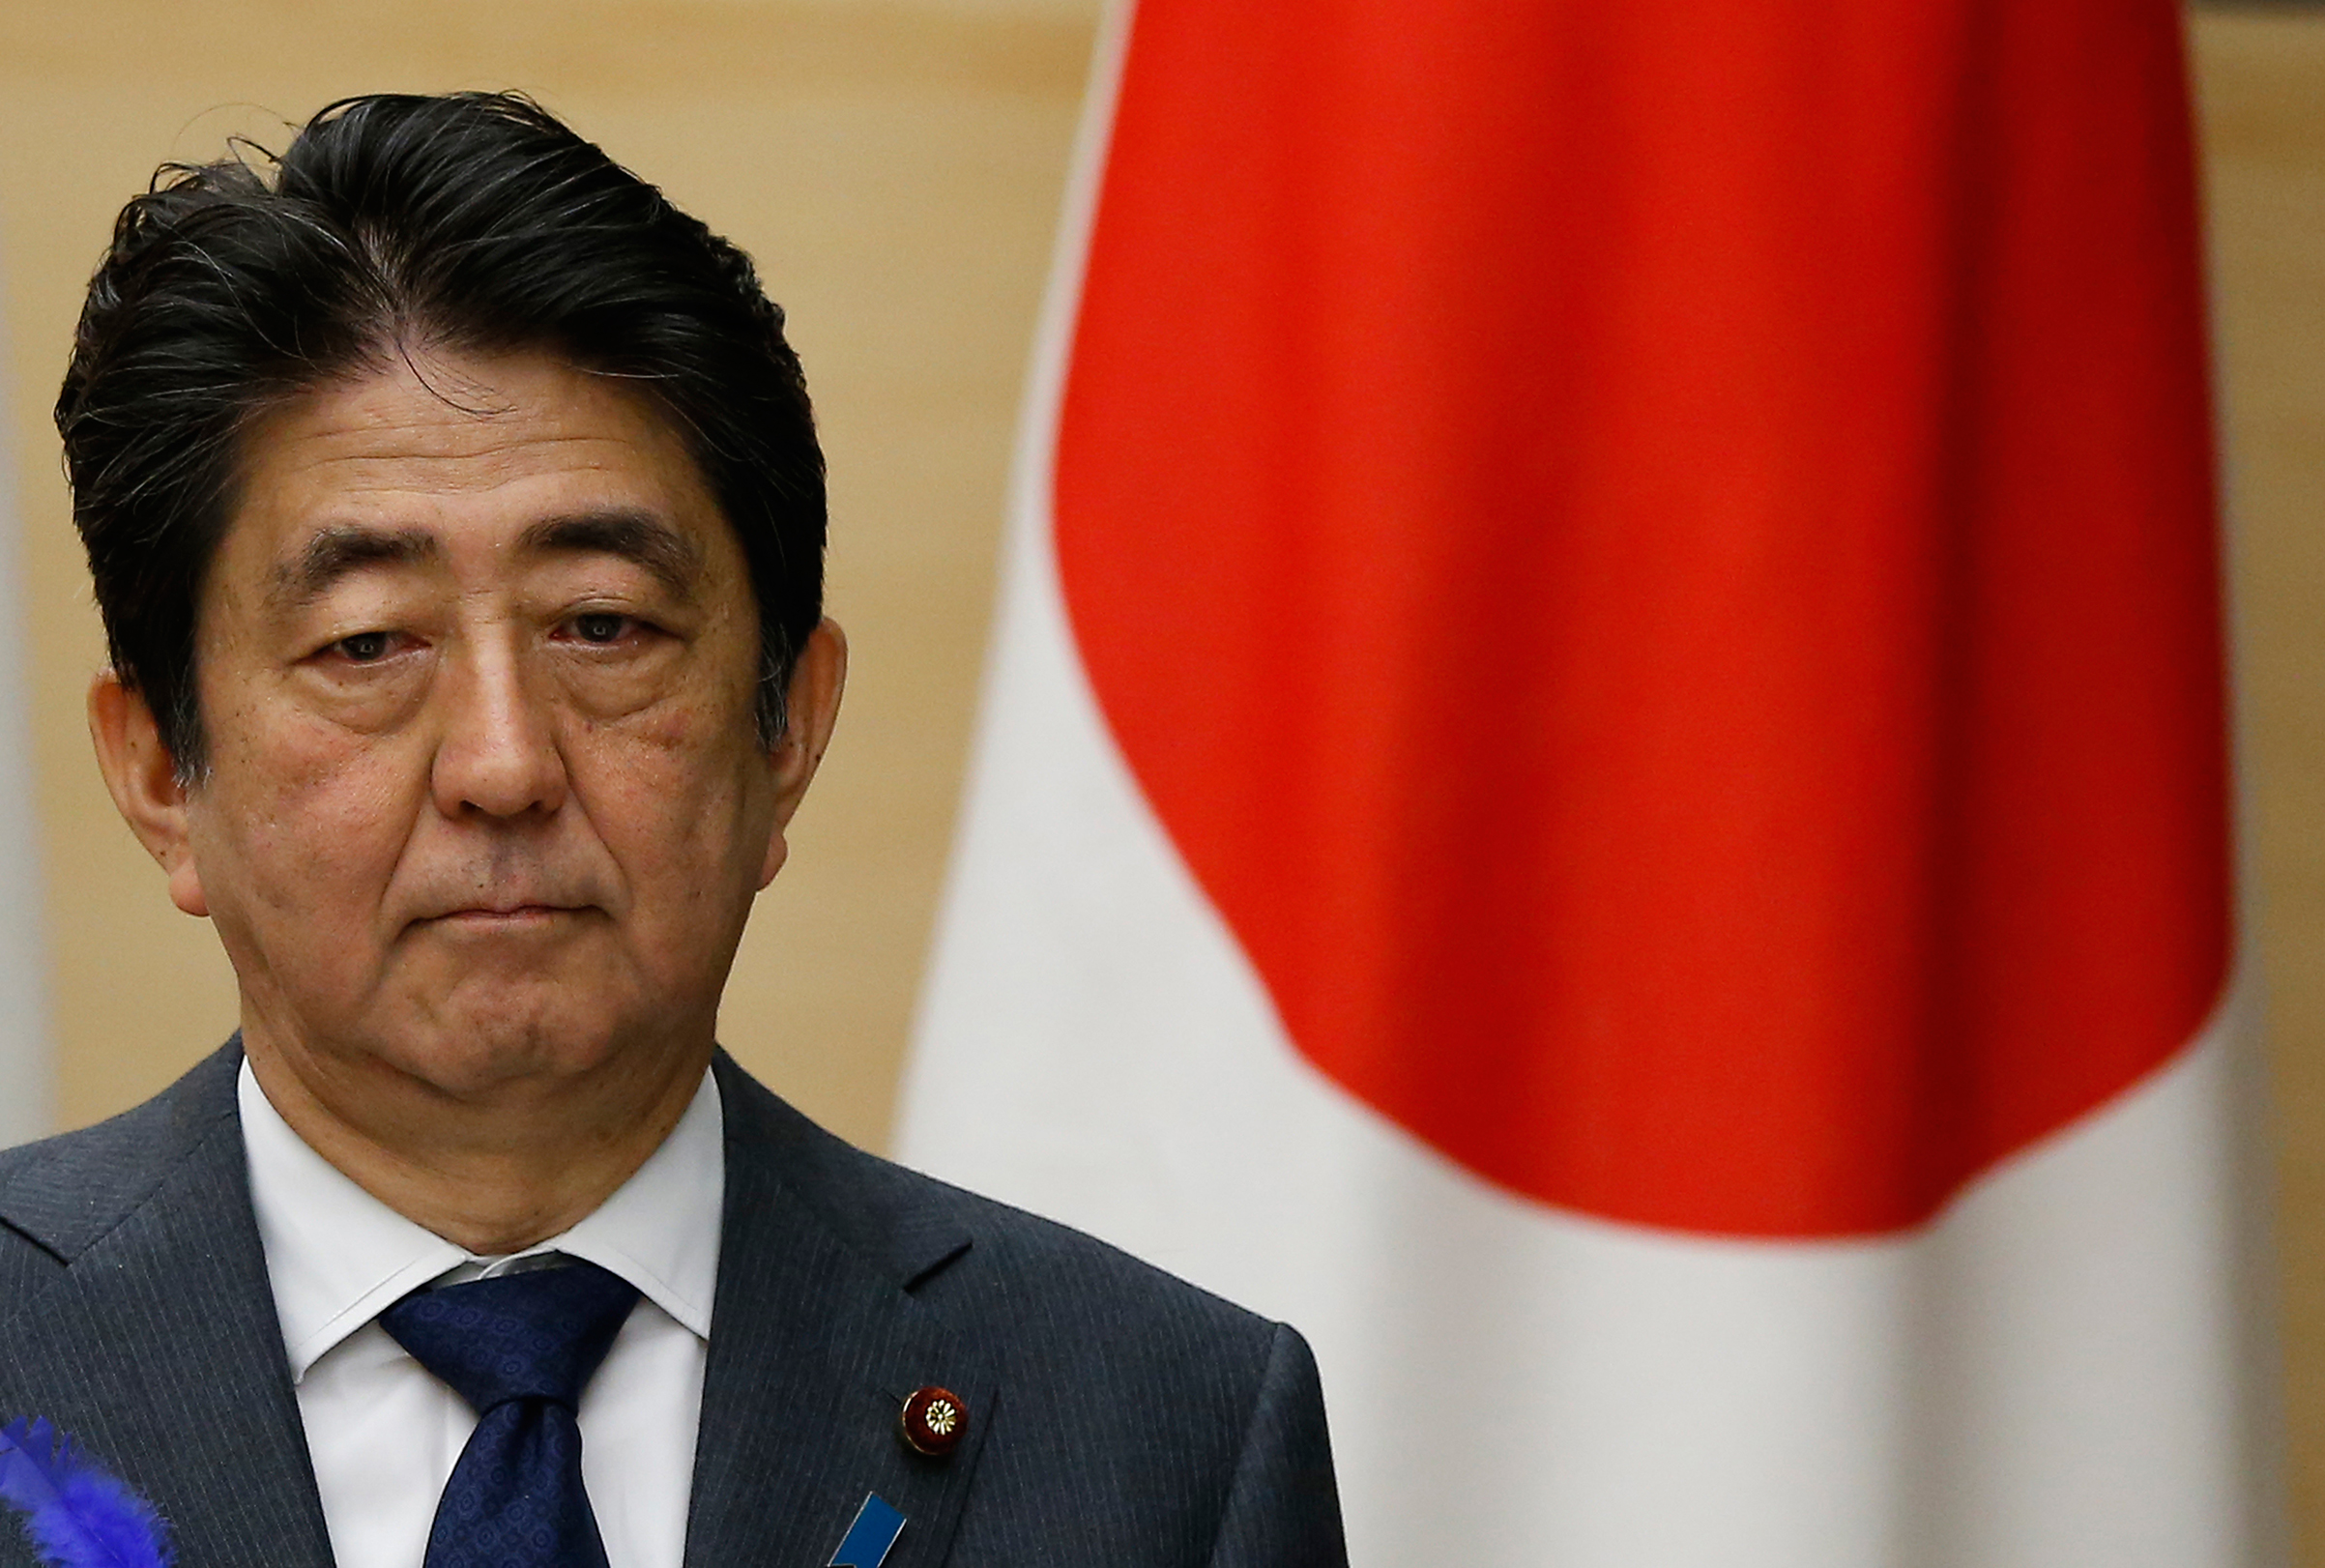 Japanese Prime Minister Shinzo Abe has been tarnished by a string of controversies (Laurent Fievet, Issei Kato—AFP/Getty Images)